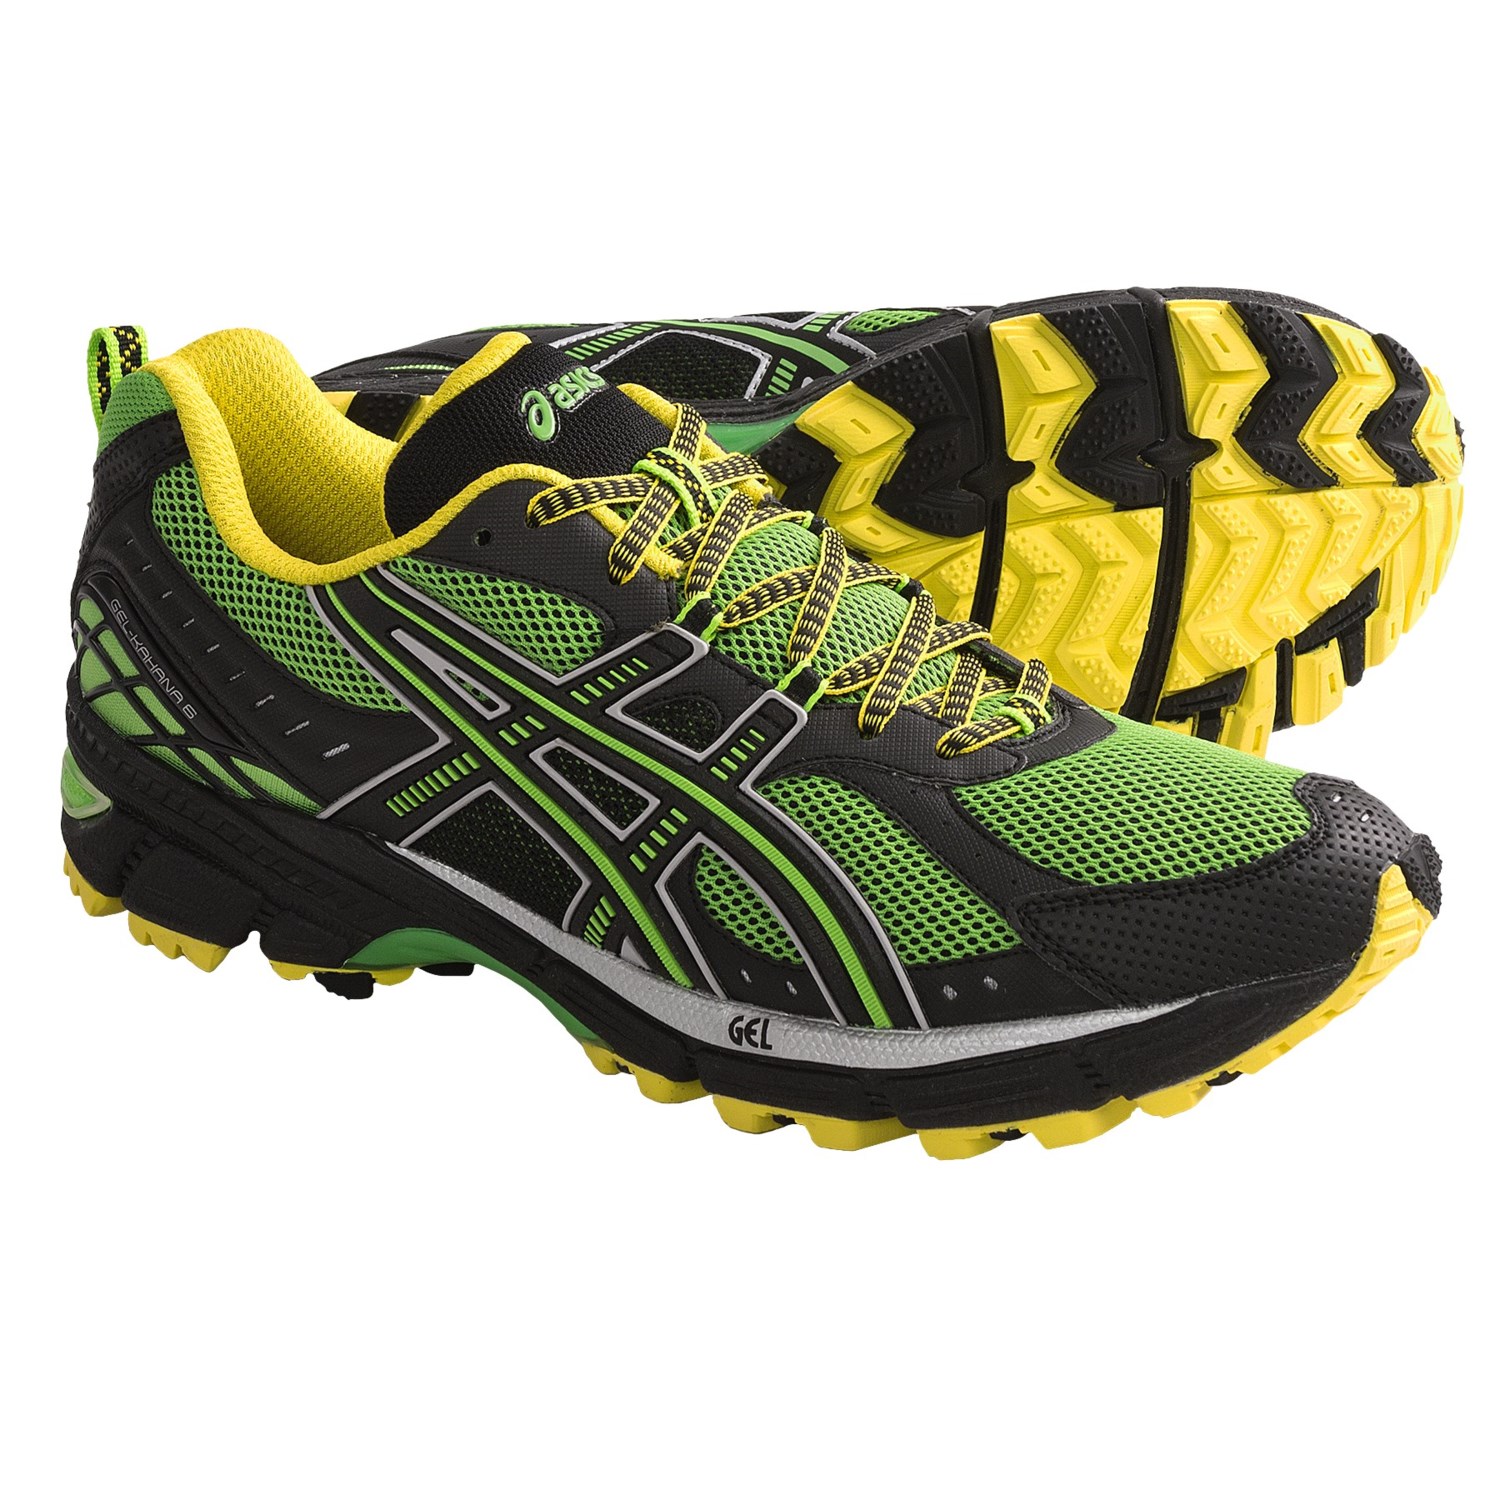 What-are-the-best-shoes-for-trail-running.srz.php